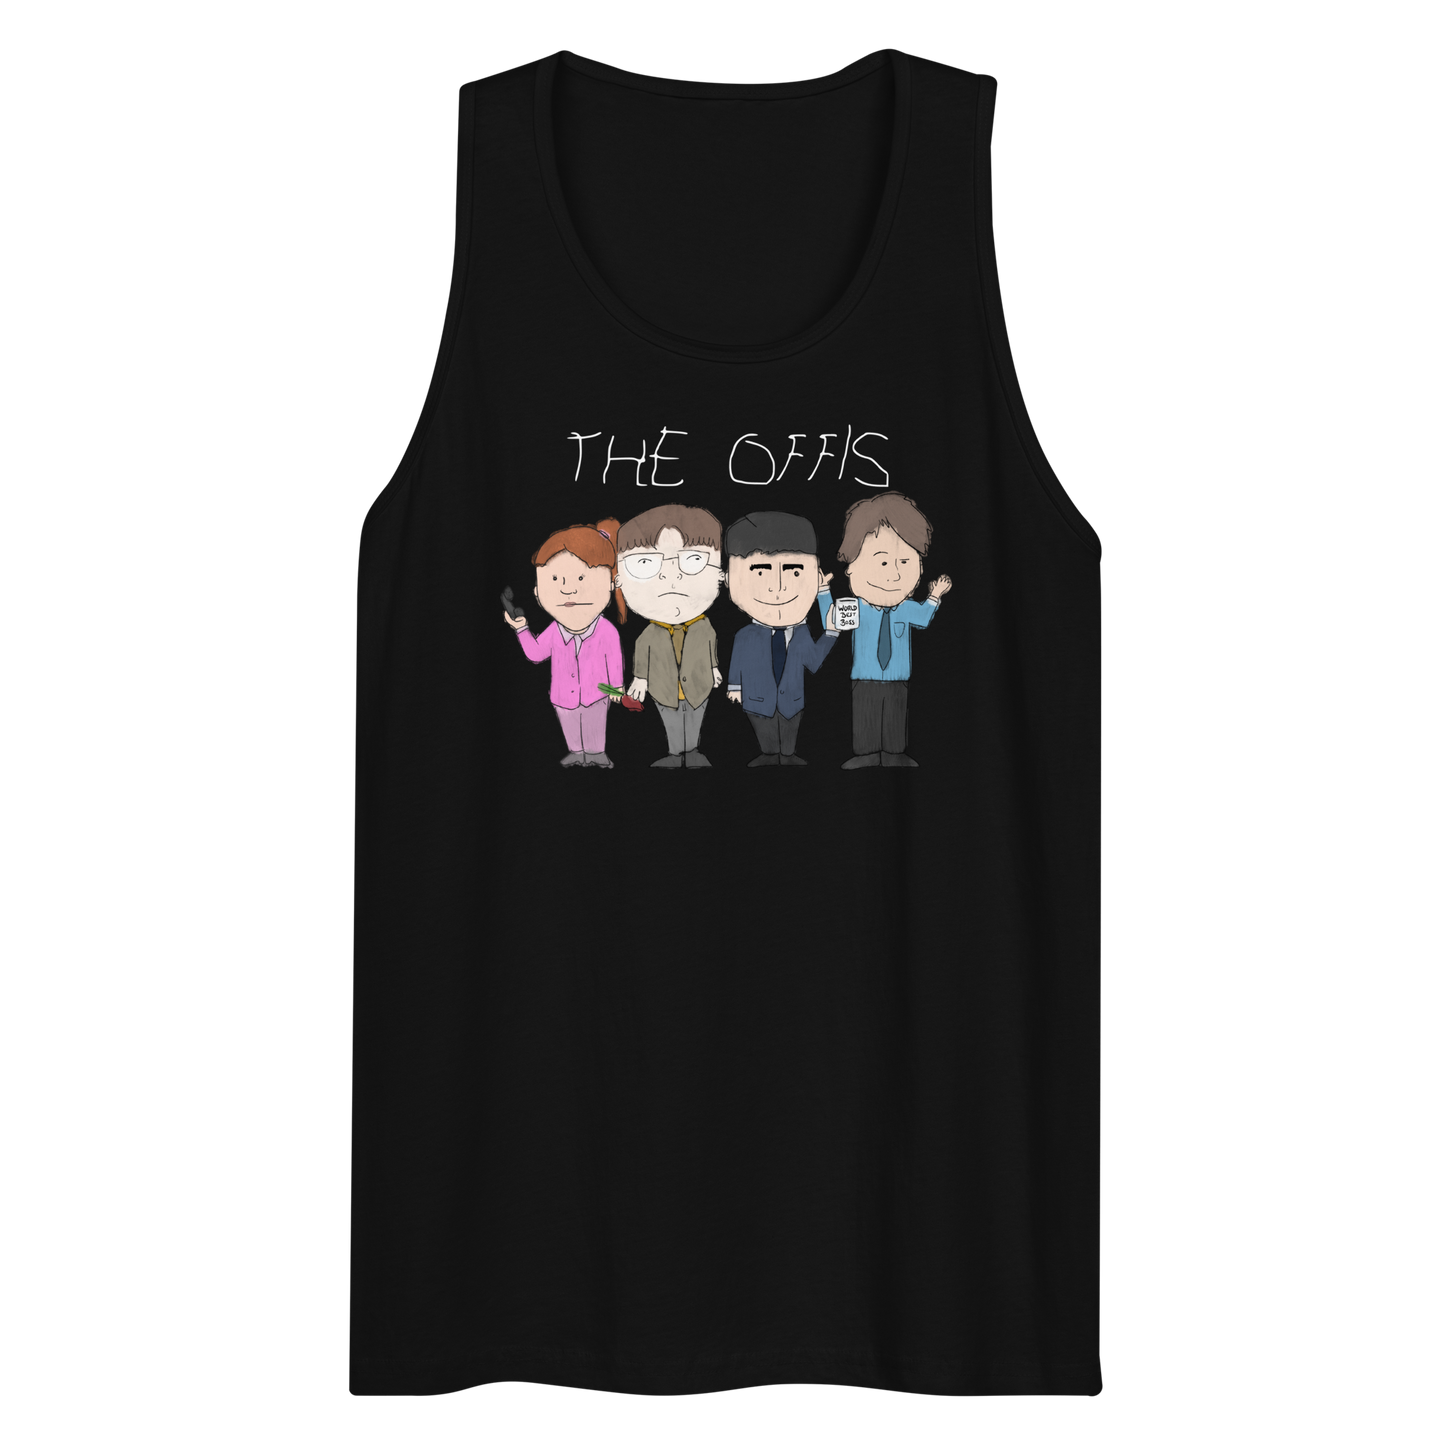 The Offis Tank Top